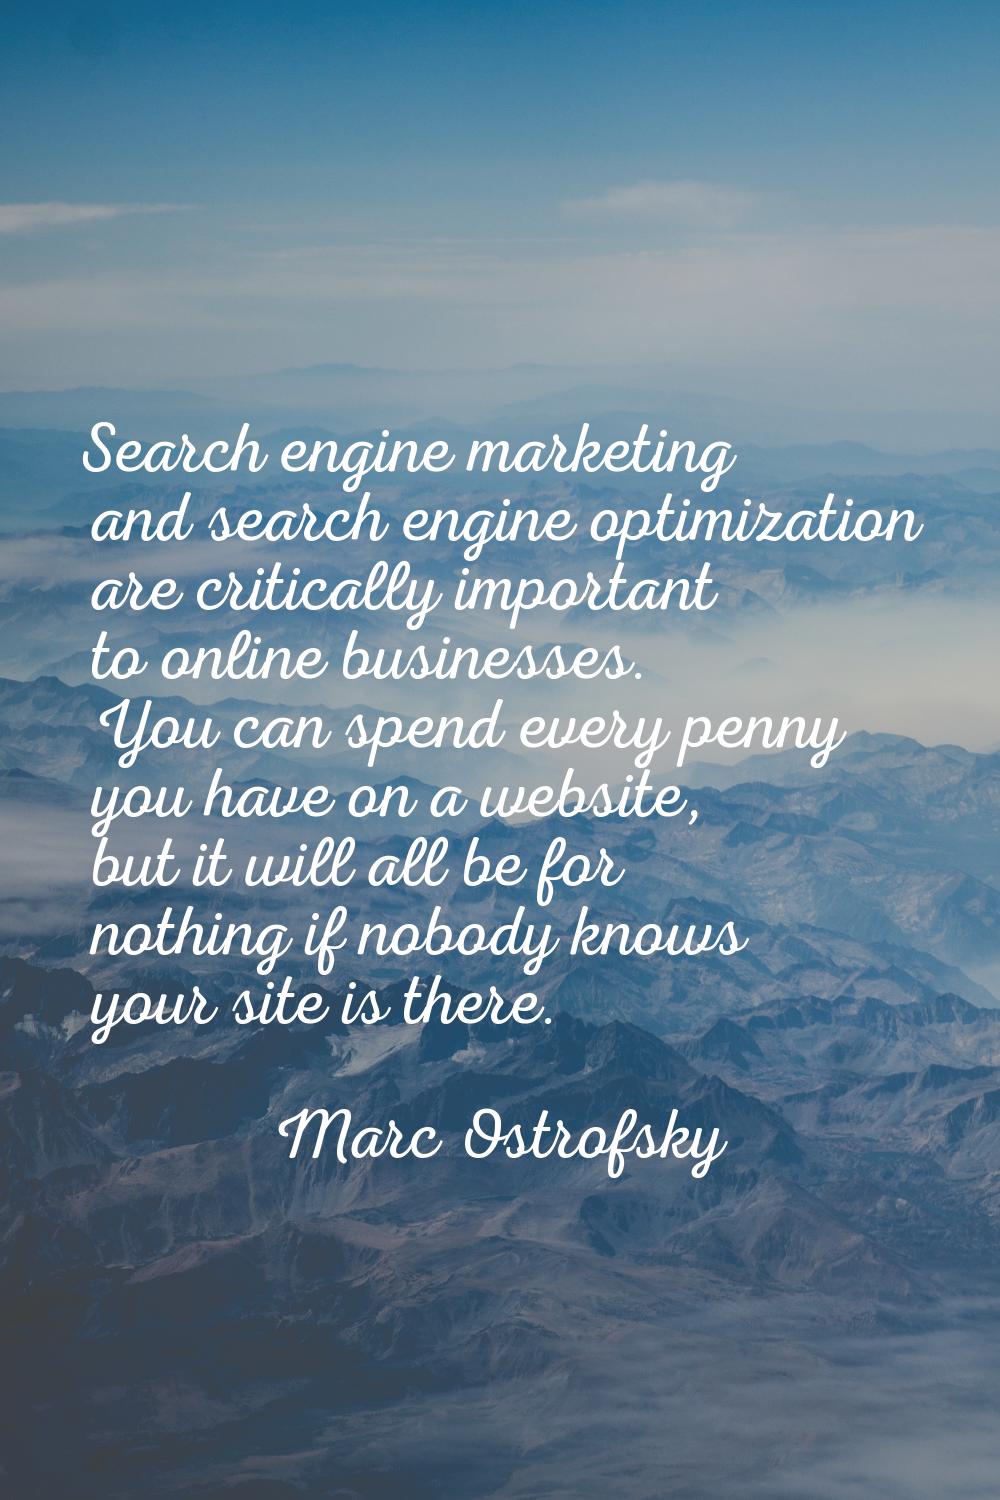 Search engine marketing and search engine optimization are critically important to online businesse